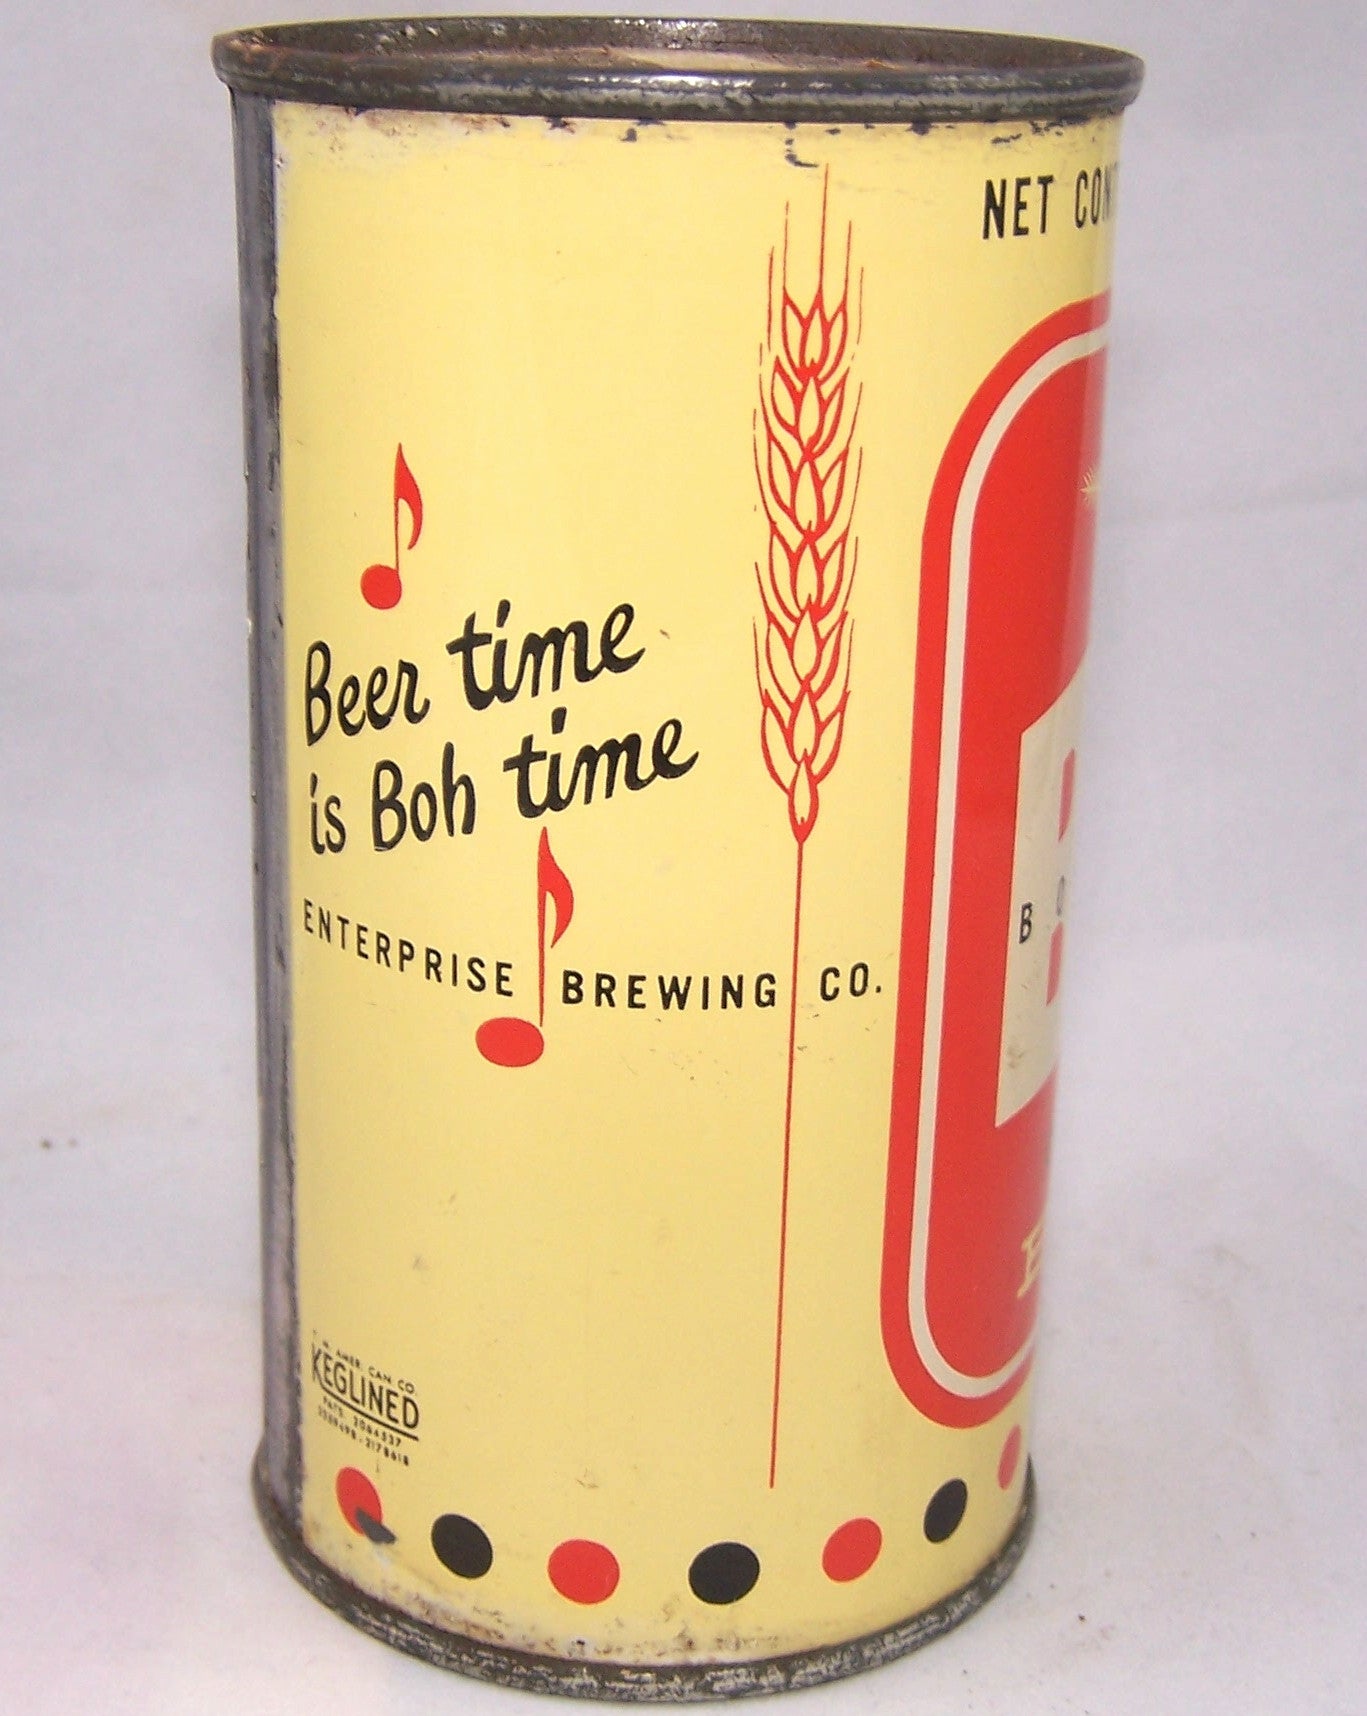 Boh Lager Beer, USBC 40-11, Grade 1/1- Sold on 08/02/16